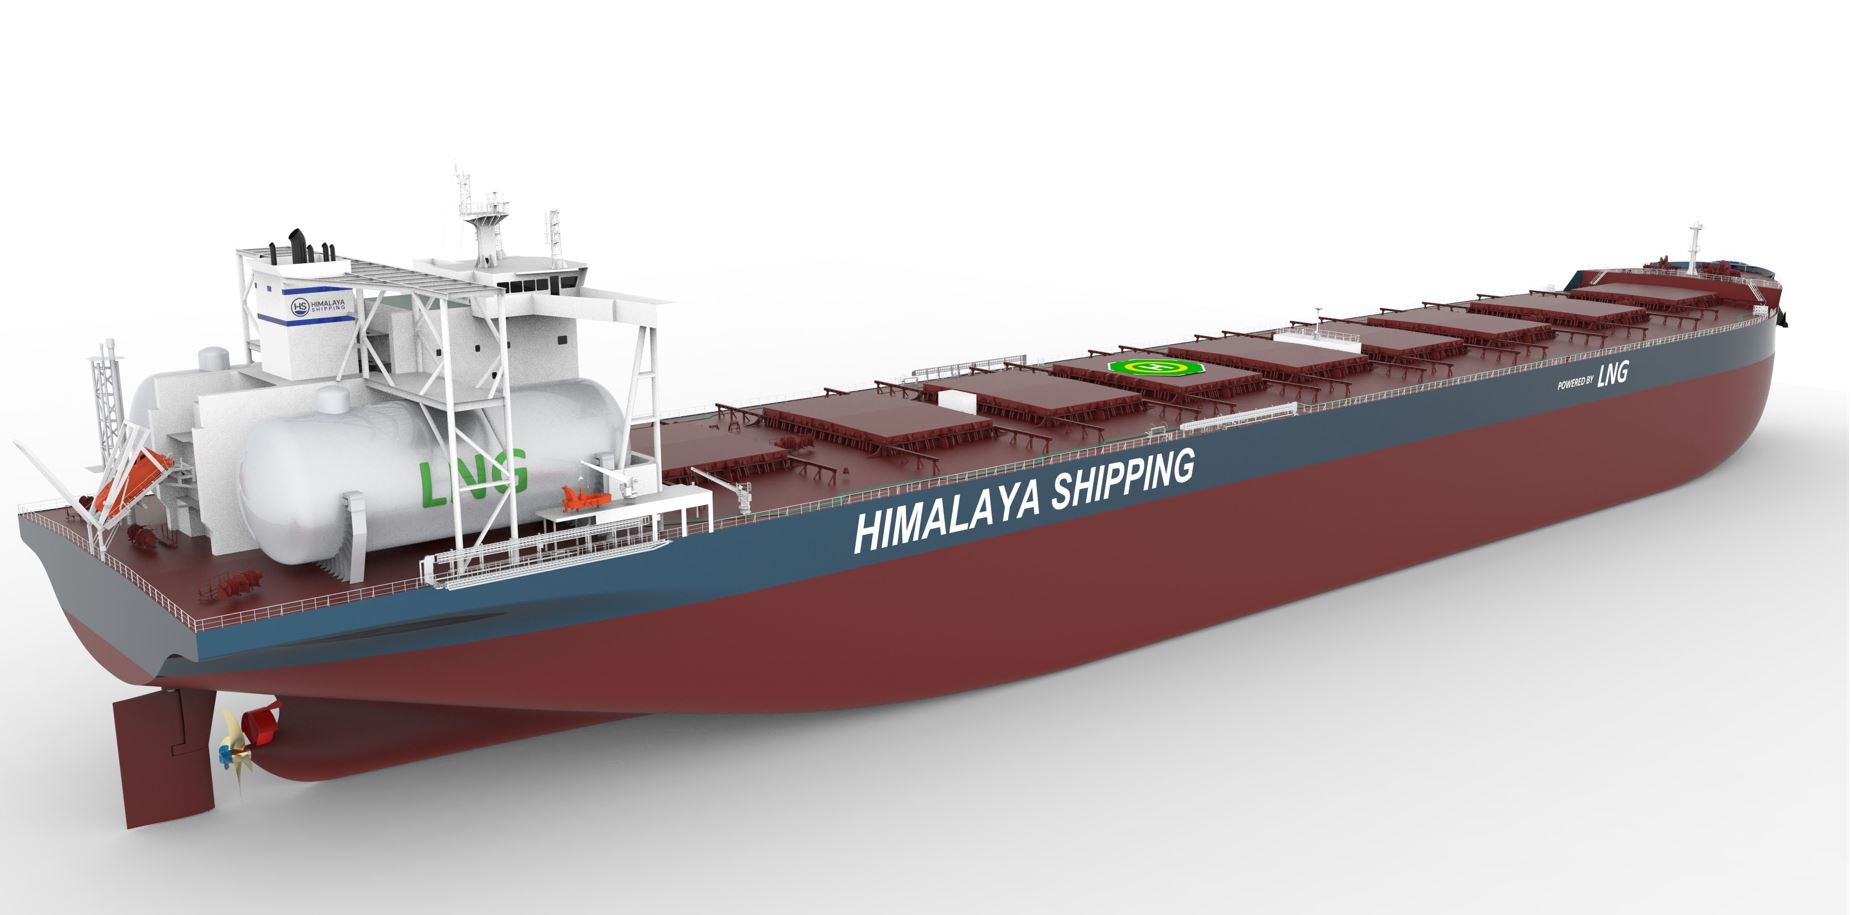 Himalaya Shipping secures charter deals for two LNG-fueled bulkers